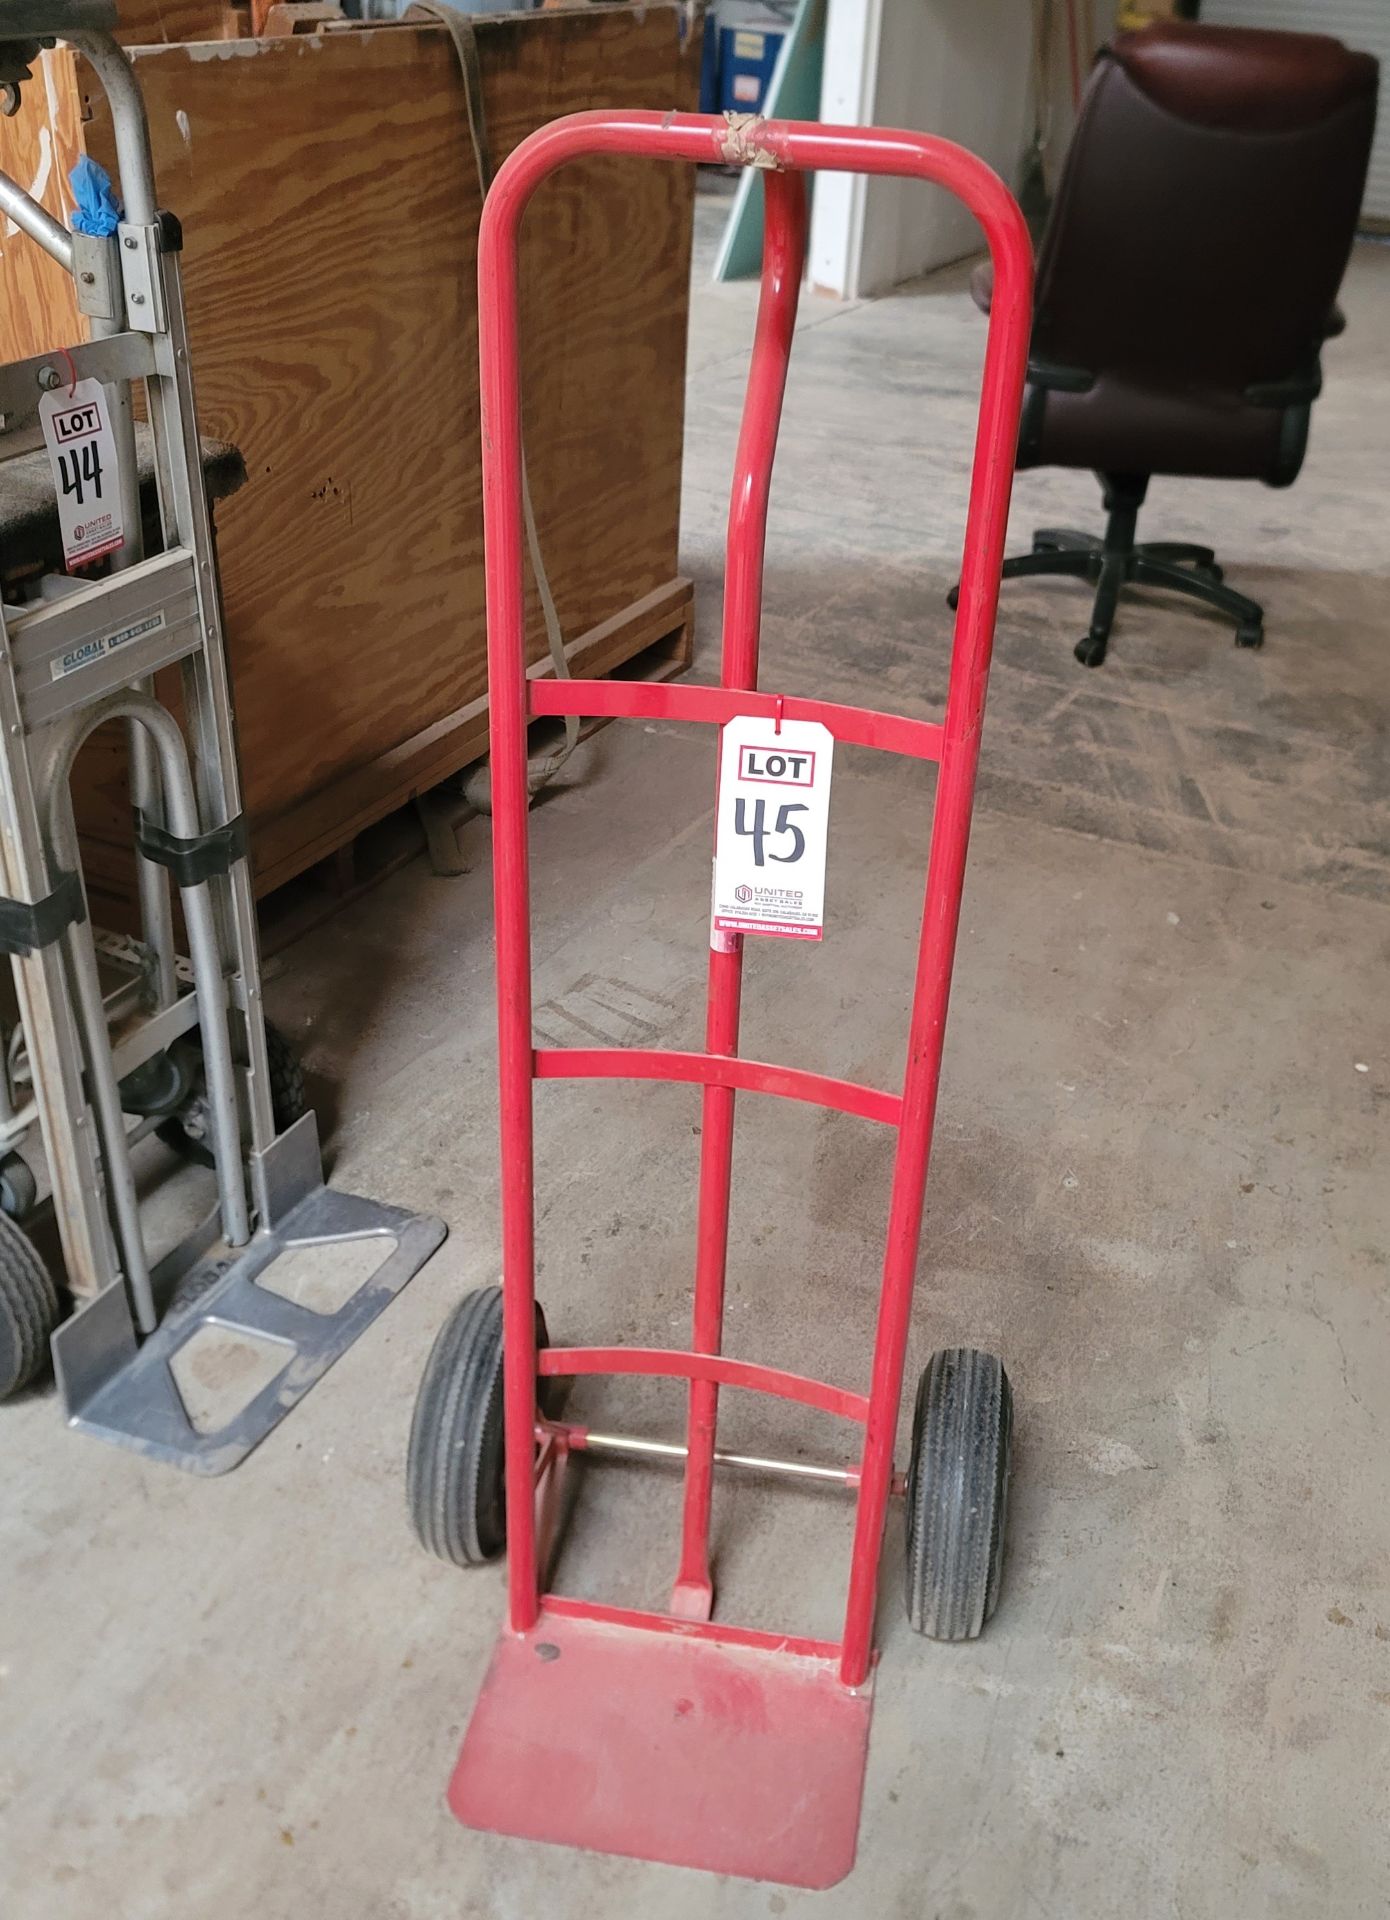 HAUL MASTER HAND TRUCK, PNEUMATIC TIRES, 600 LB CAPACITY, (DELAYED PICKUP UNTIL FEBRUARY 20)